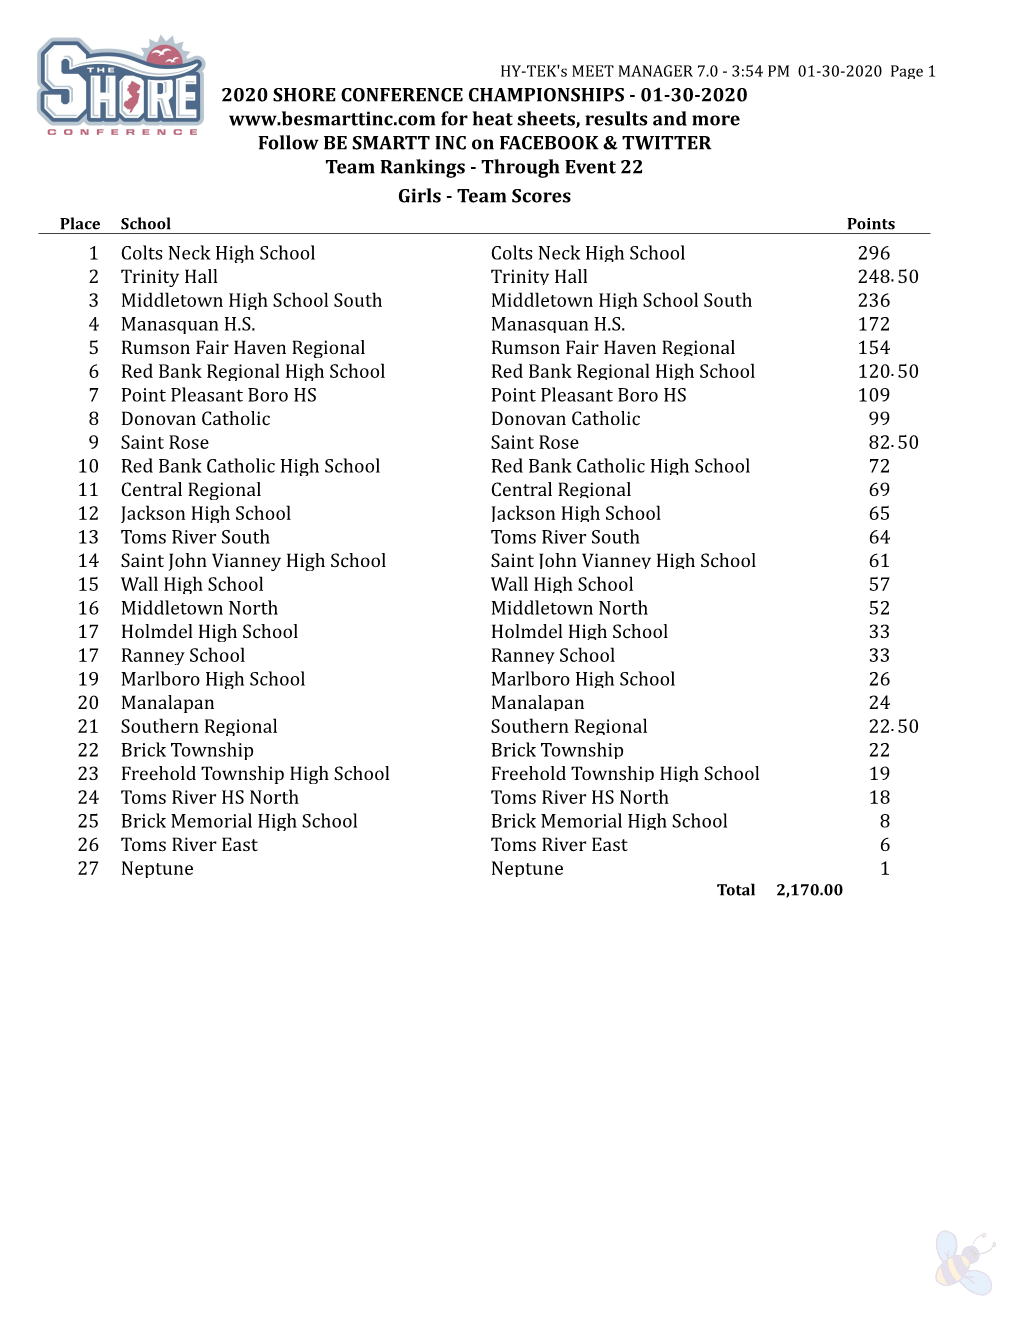 01-30-2020 for Heat Sheets, Results and More